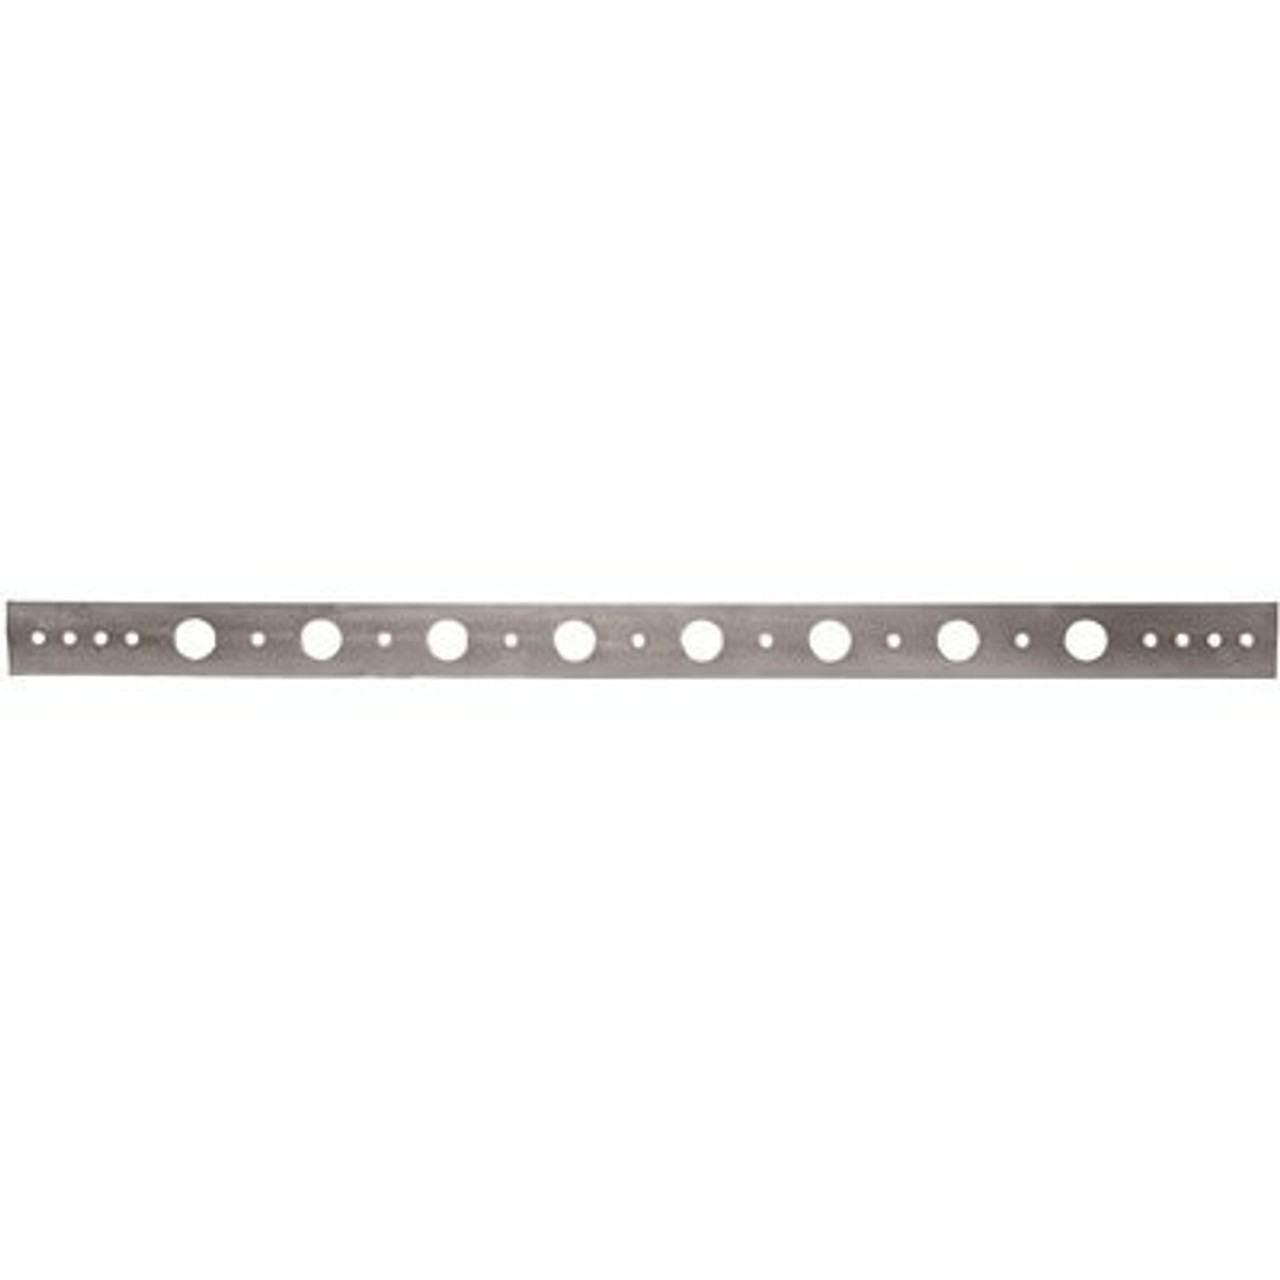 Ips Corporation Water-Tite 86618 Sure-Tite 20-Inch Support Bracket, Copper-Plated 16-Gauge Steel, 1/2-Inch Holes